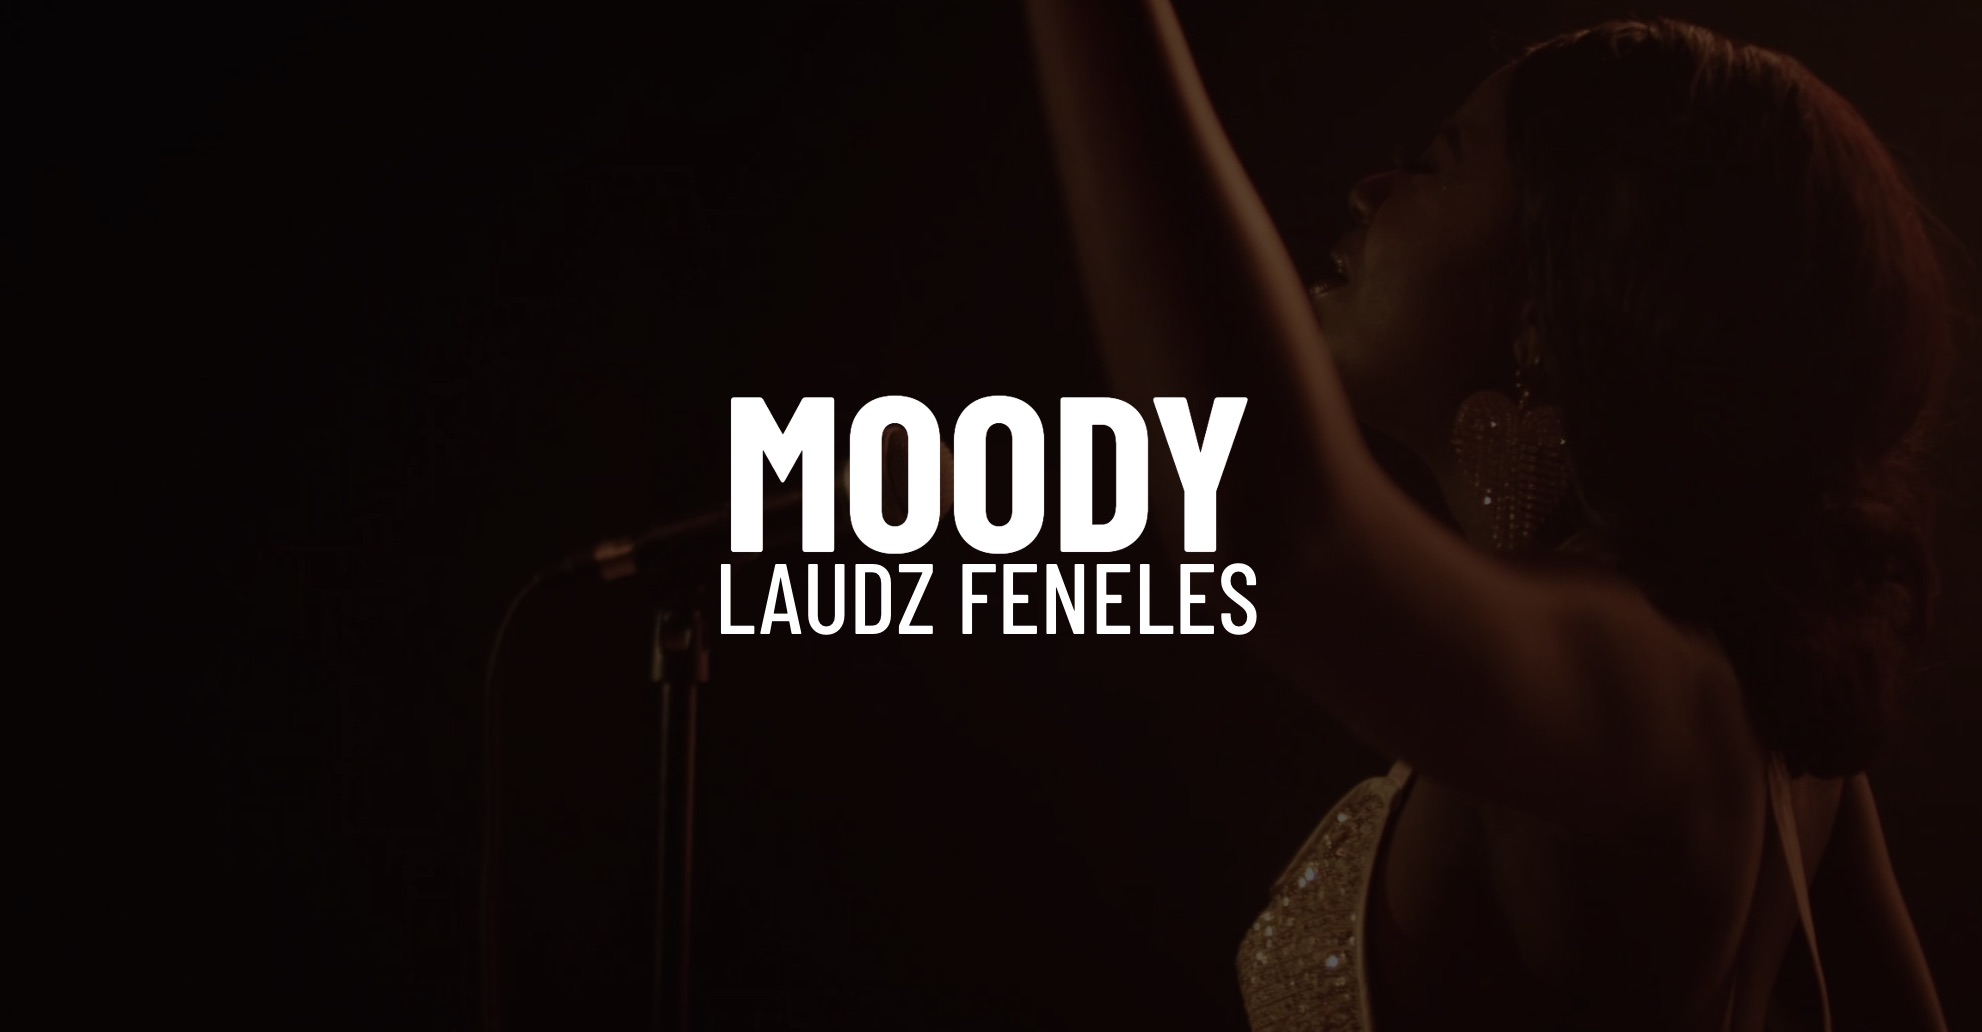 White Moody Laudz Feneles title on background headshot of her singing with arm in the air